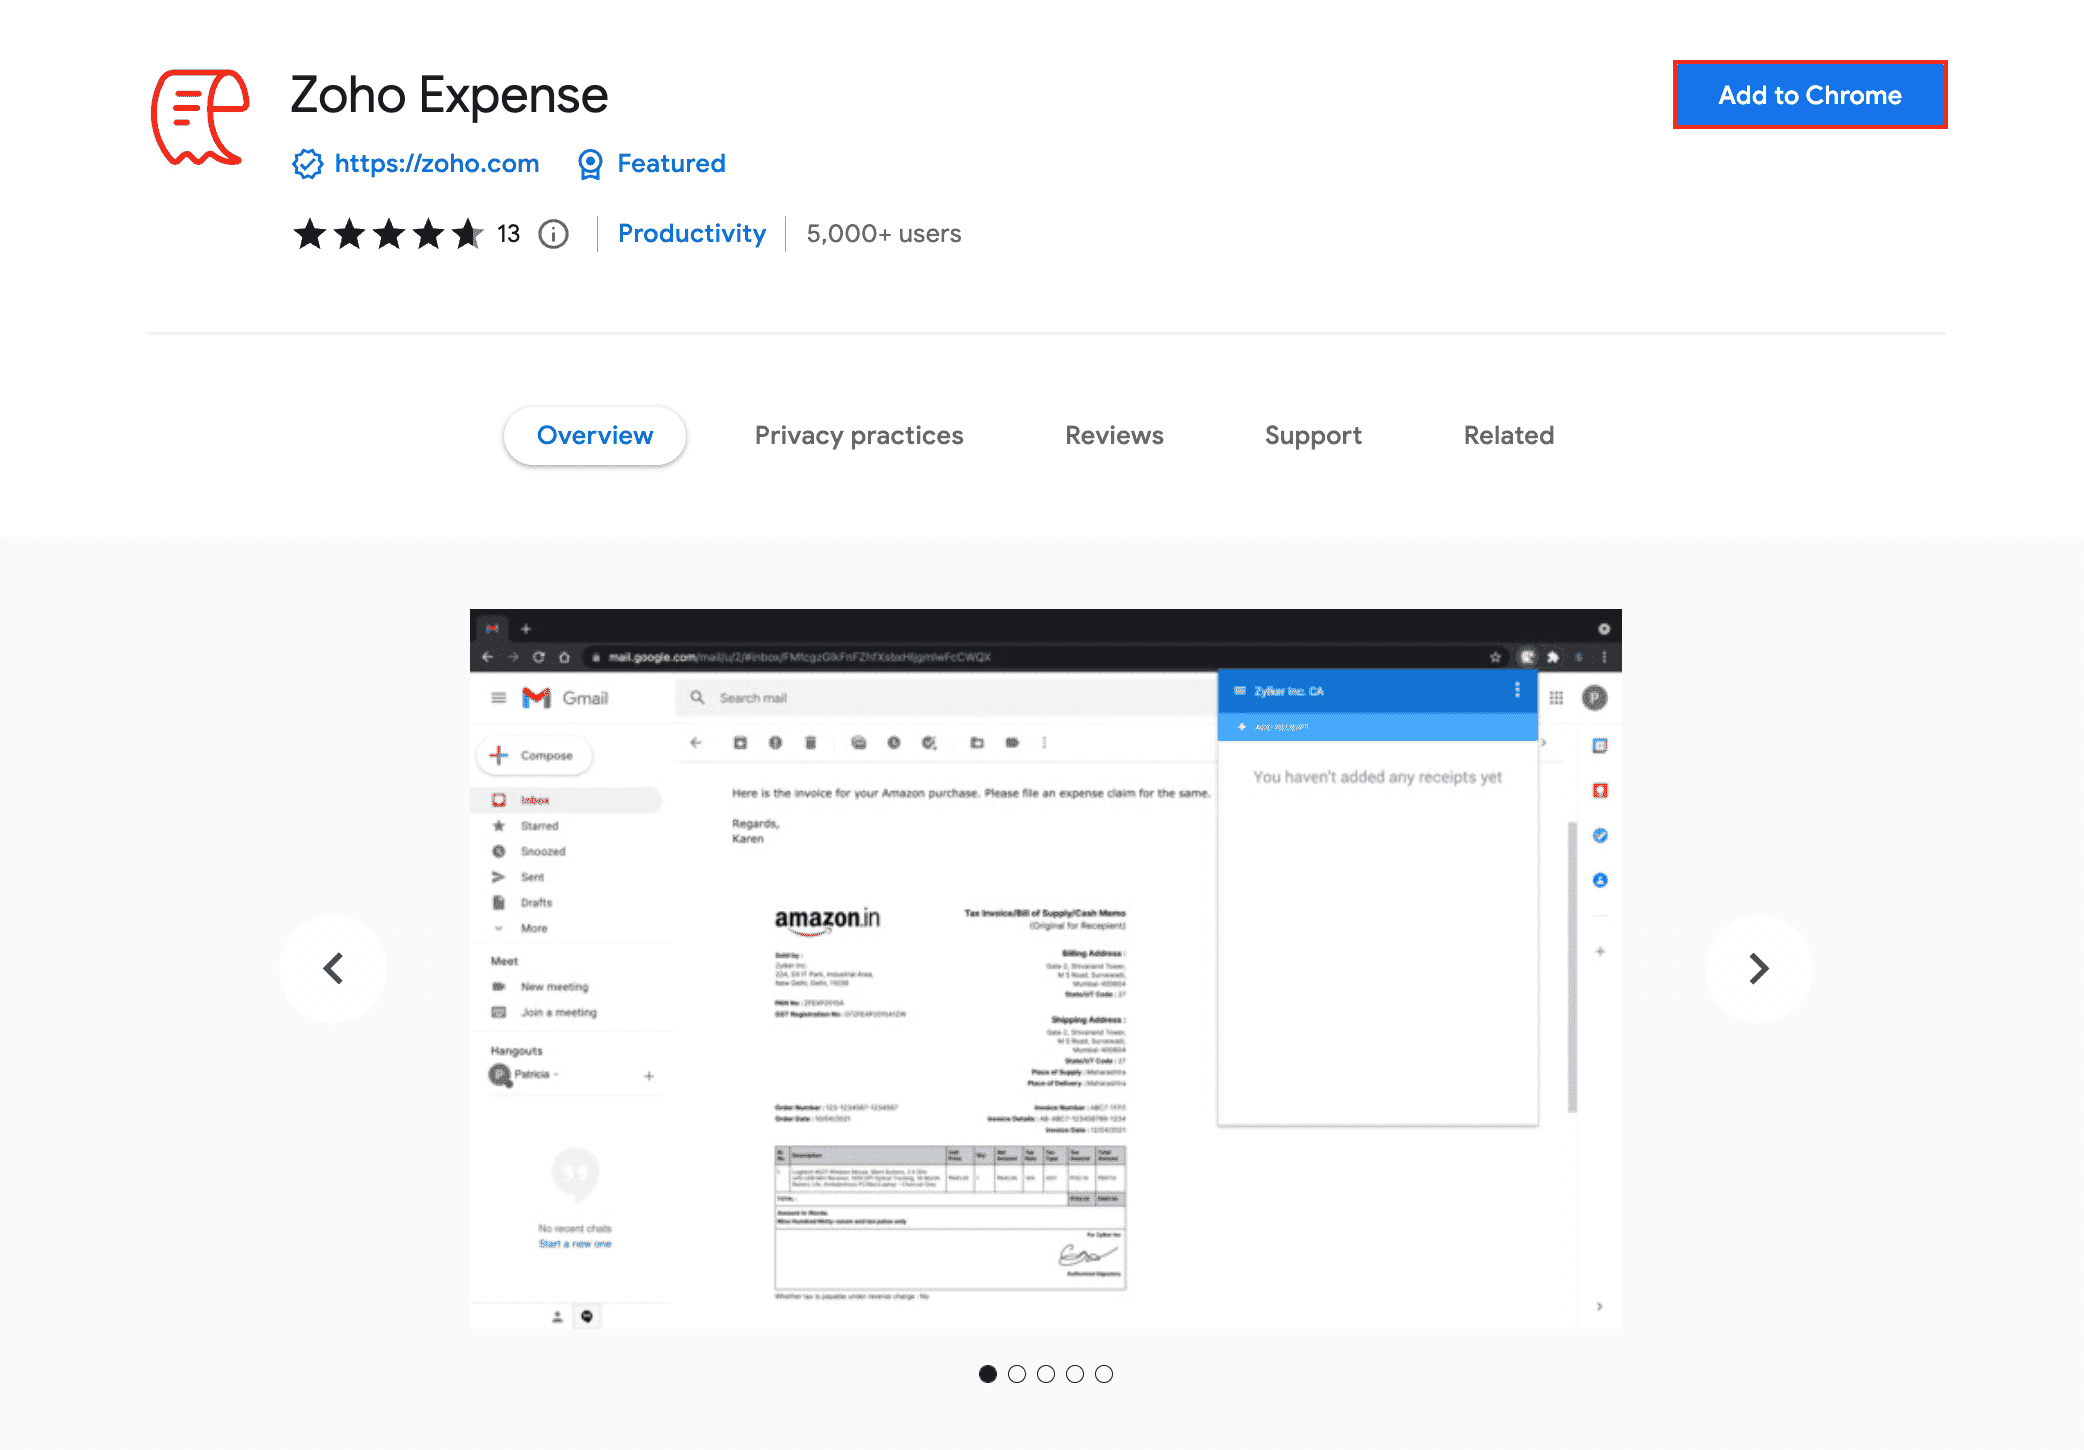 Download Chrome Extension